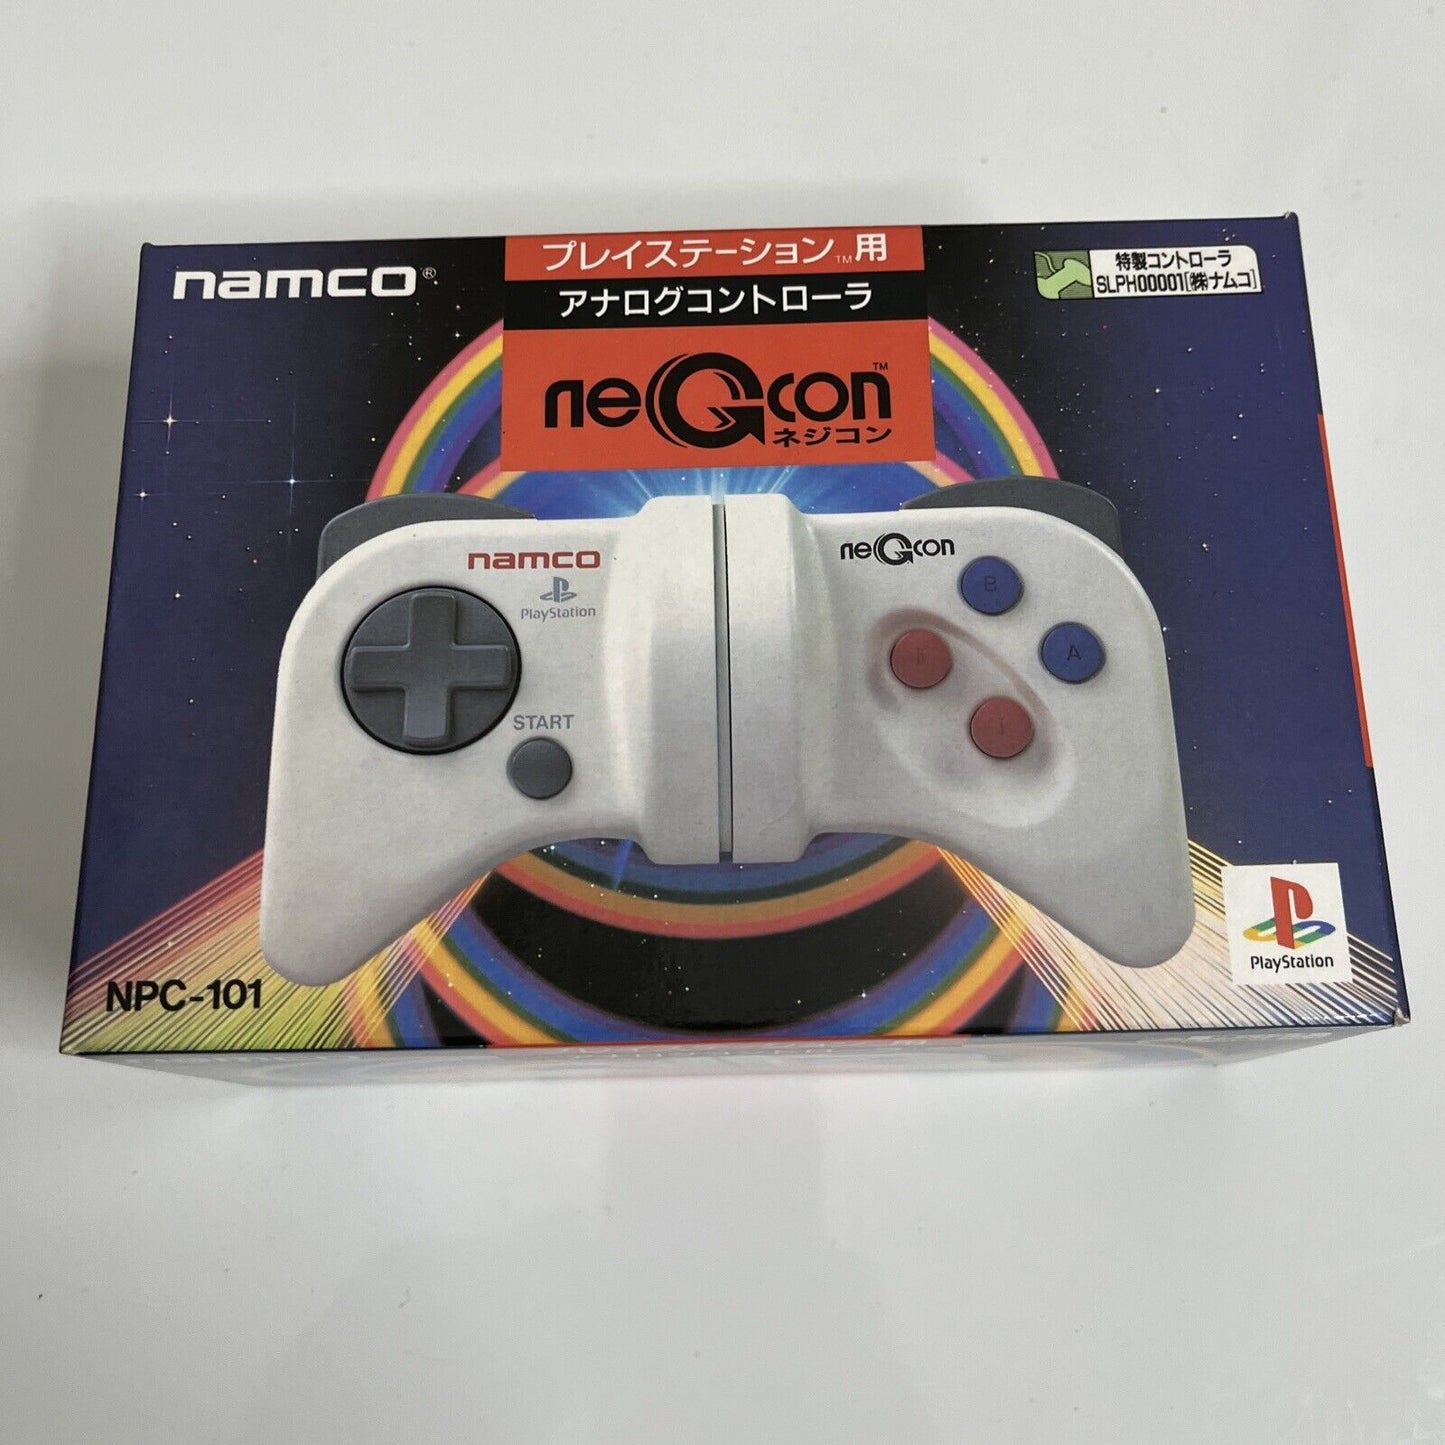 Sony PlayStation Namco Negcon Controller White for PS1 NPC-101 NEW